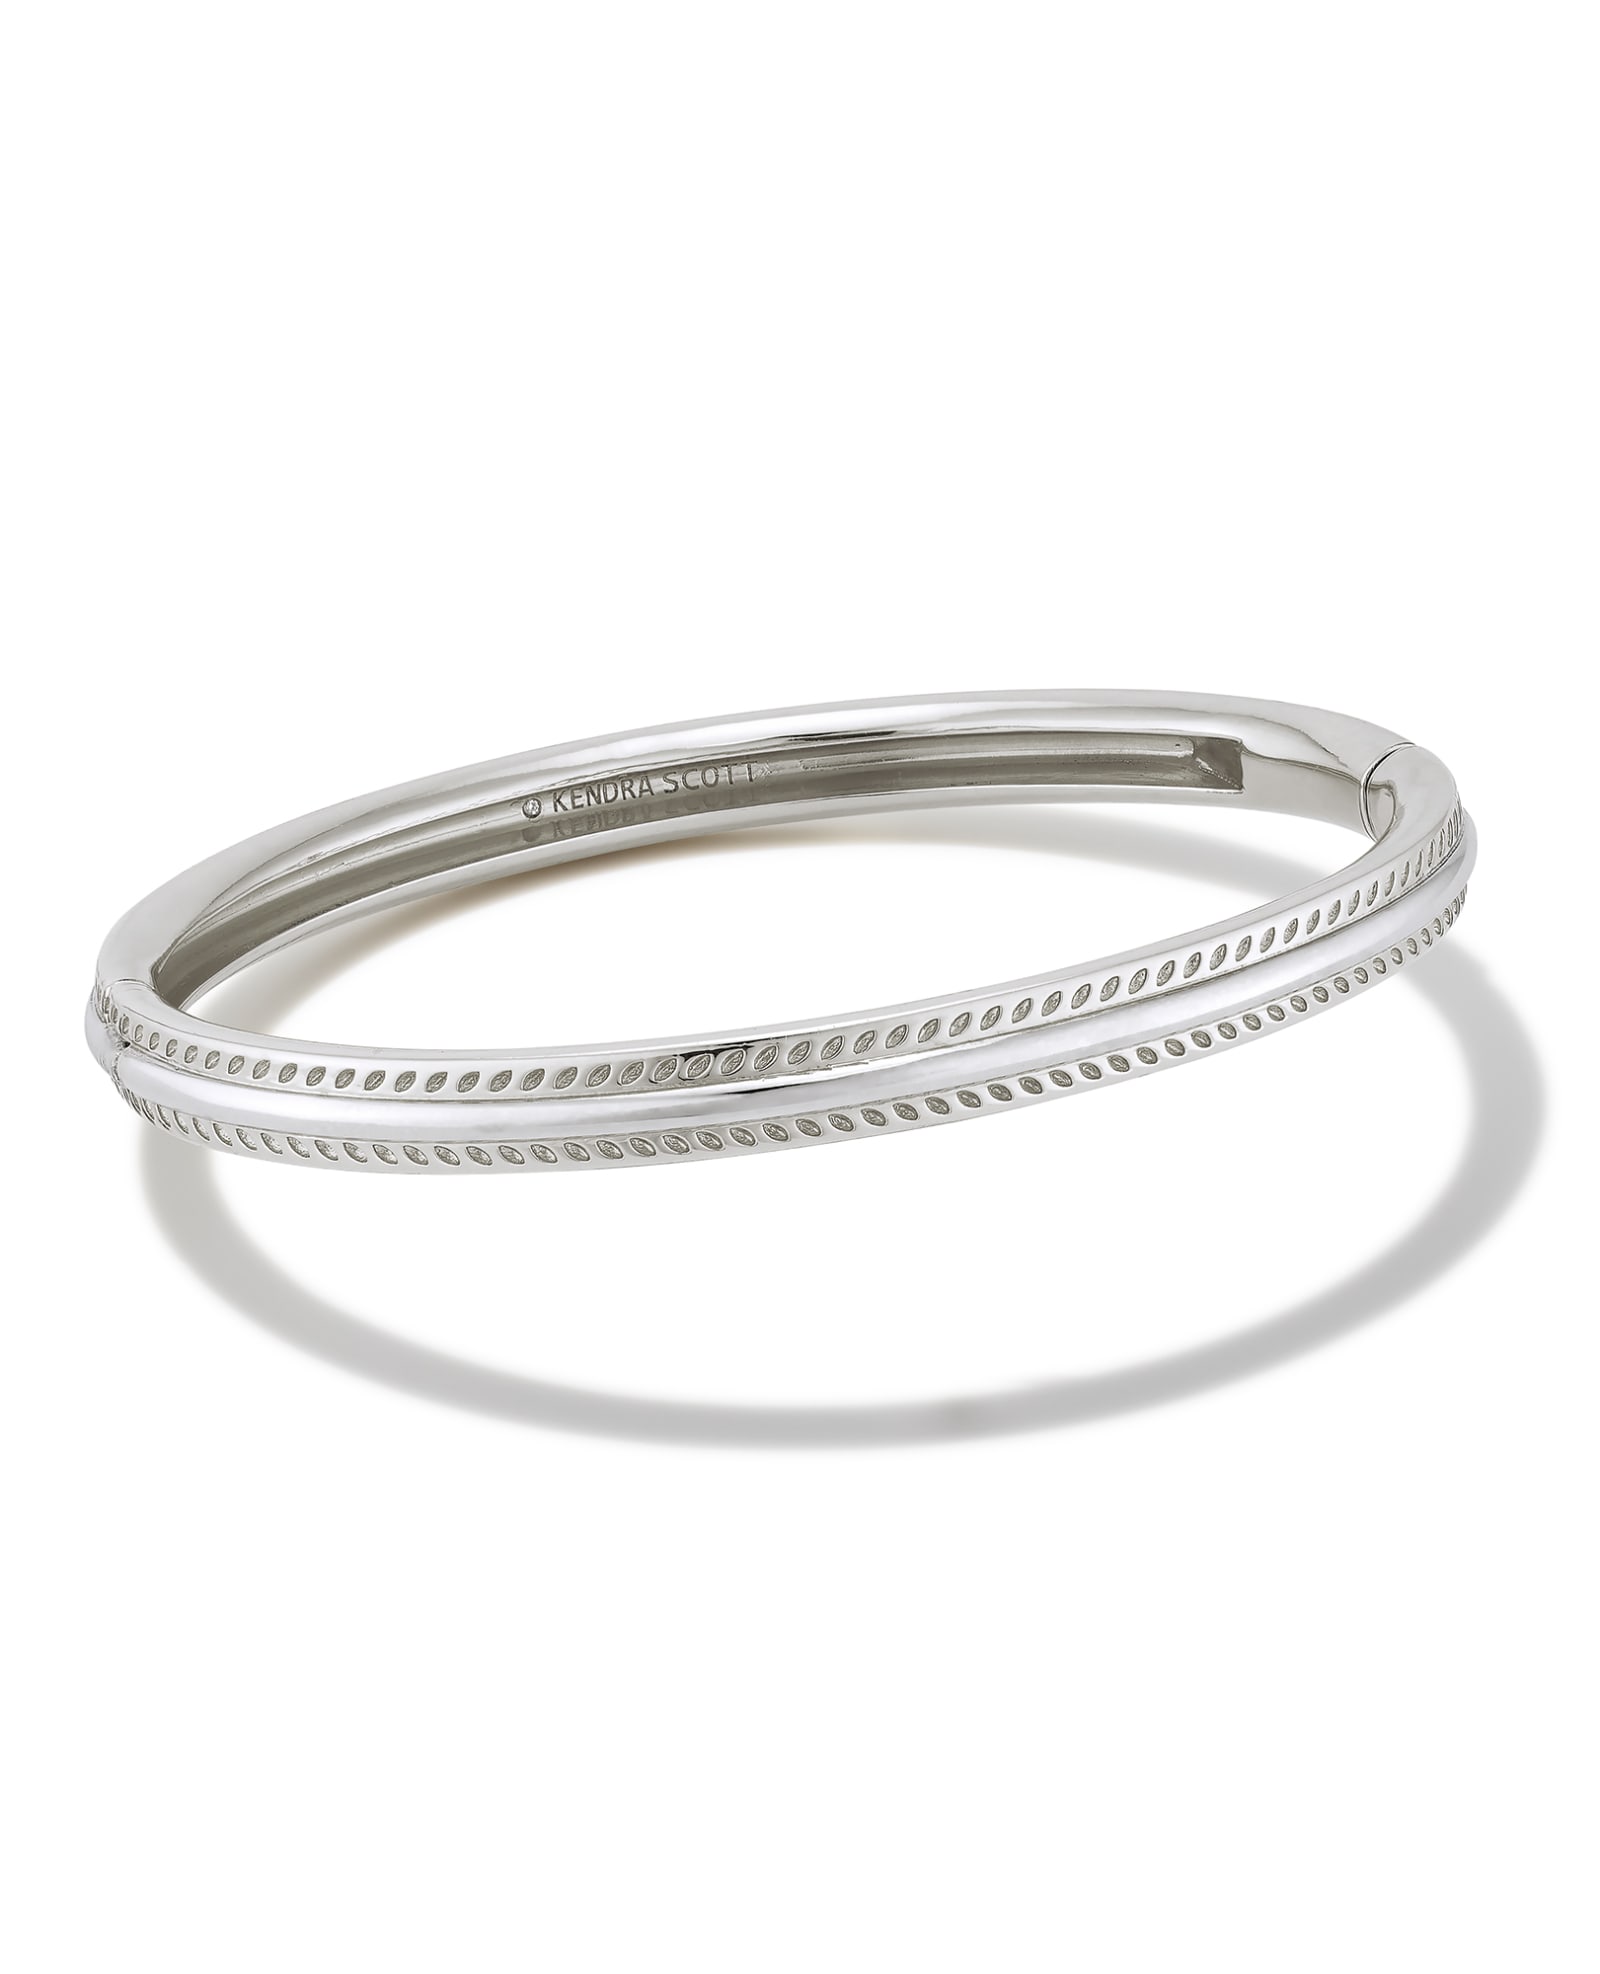 Silver Tone Latch Bangle Bracelet with A Red Officially Lice (940327)